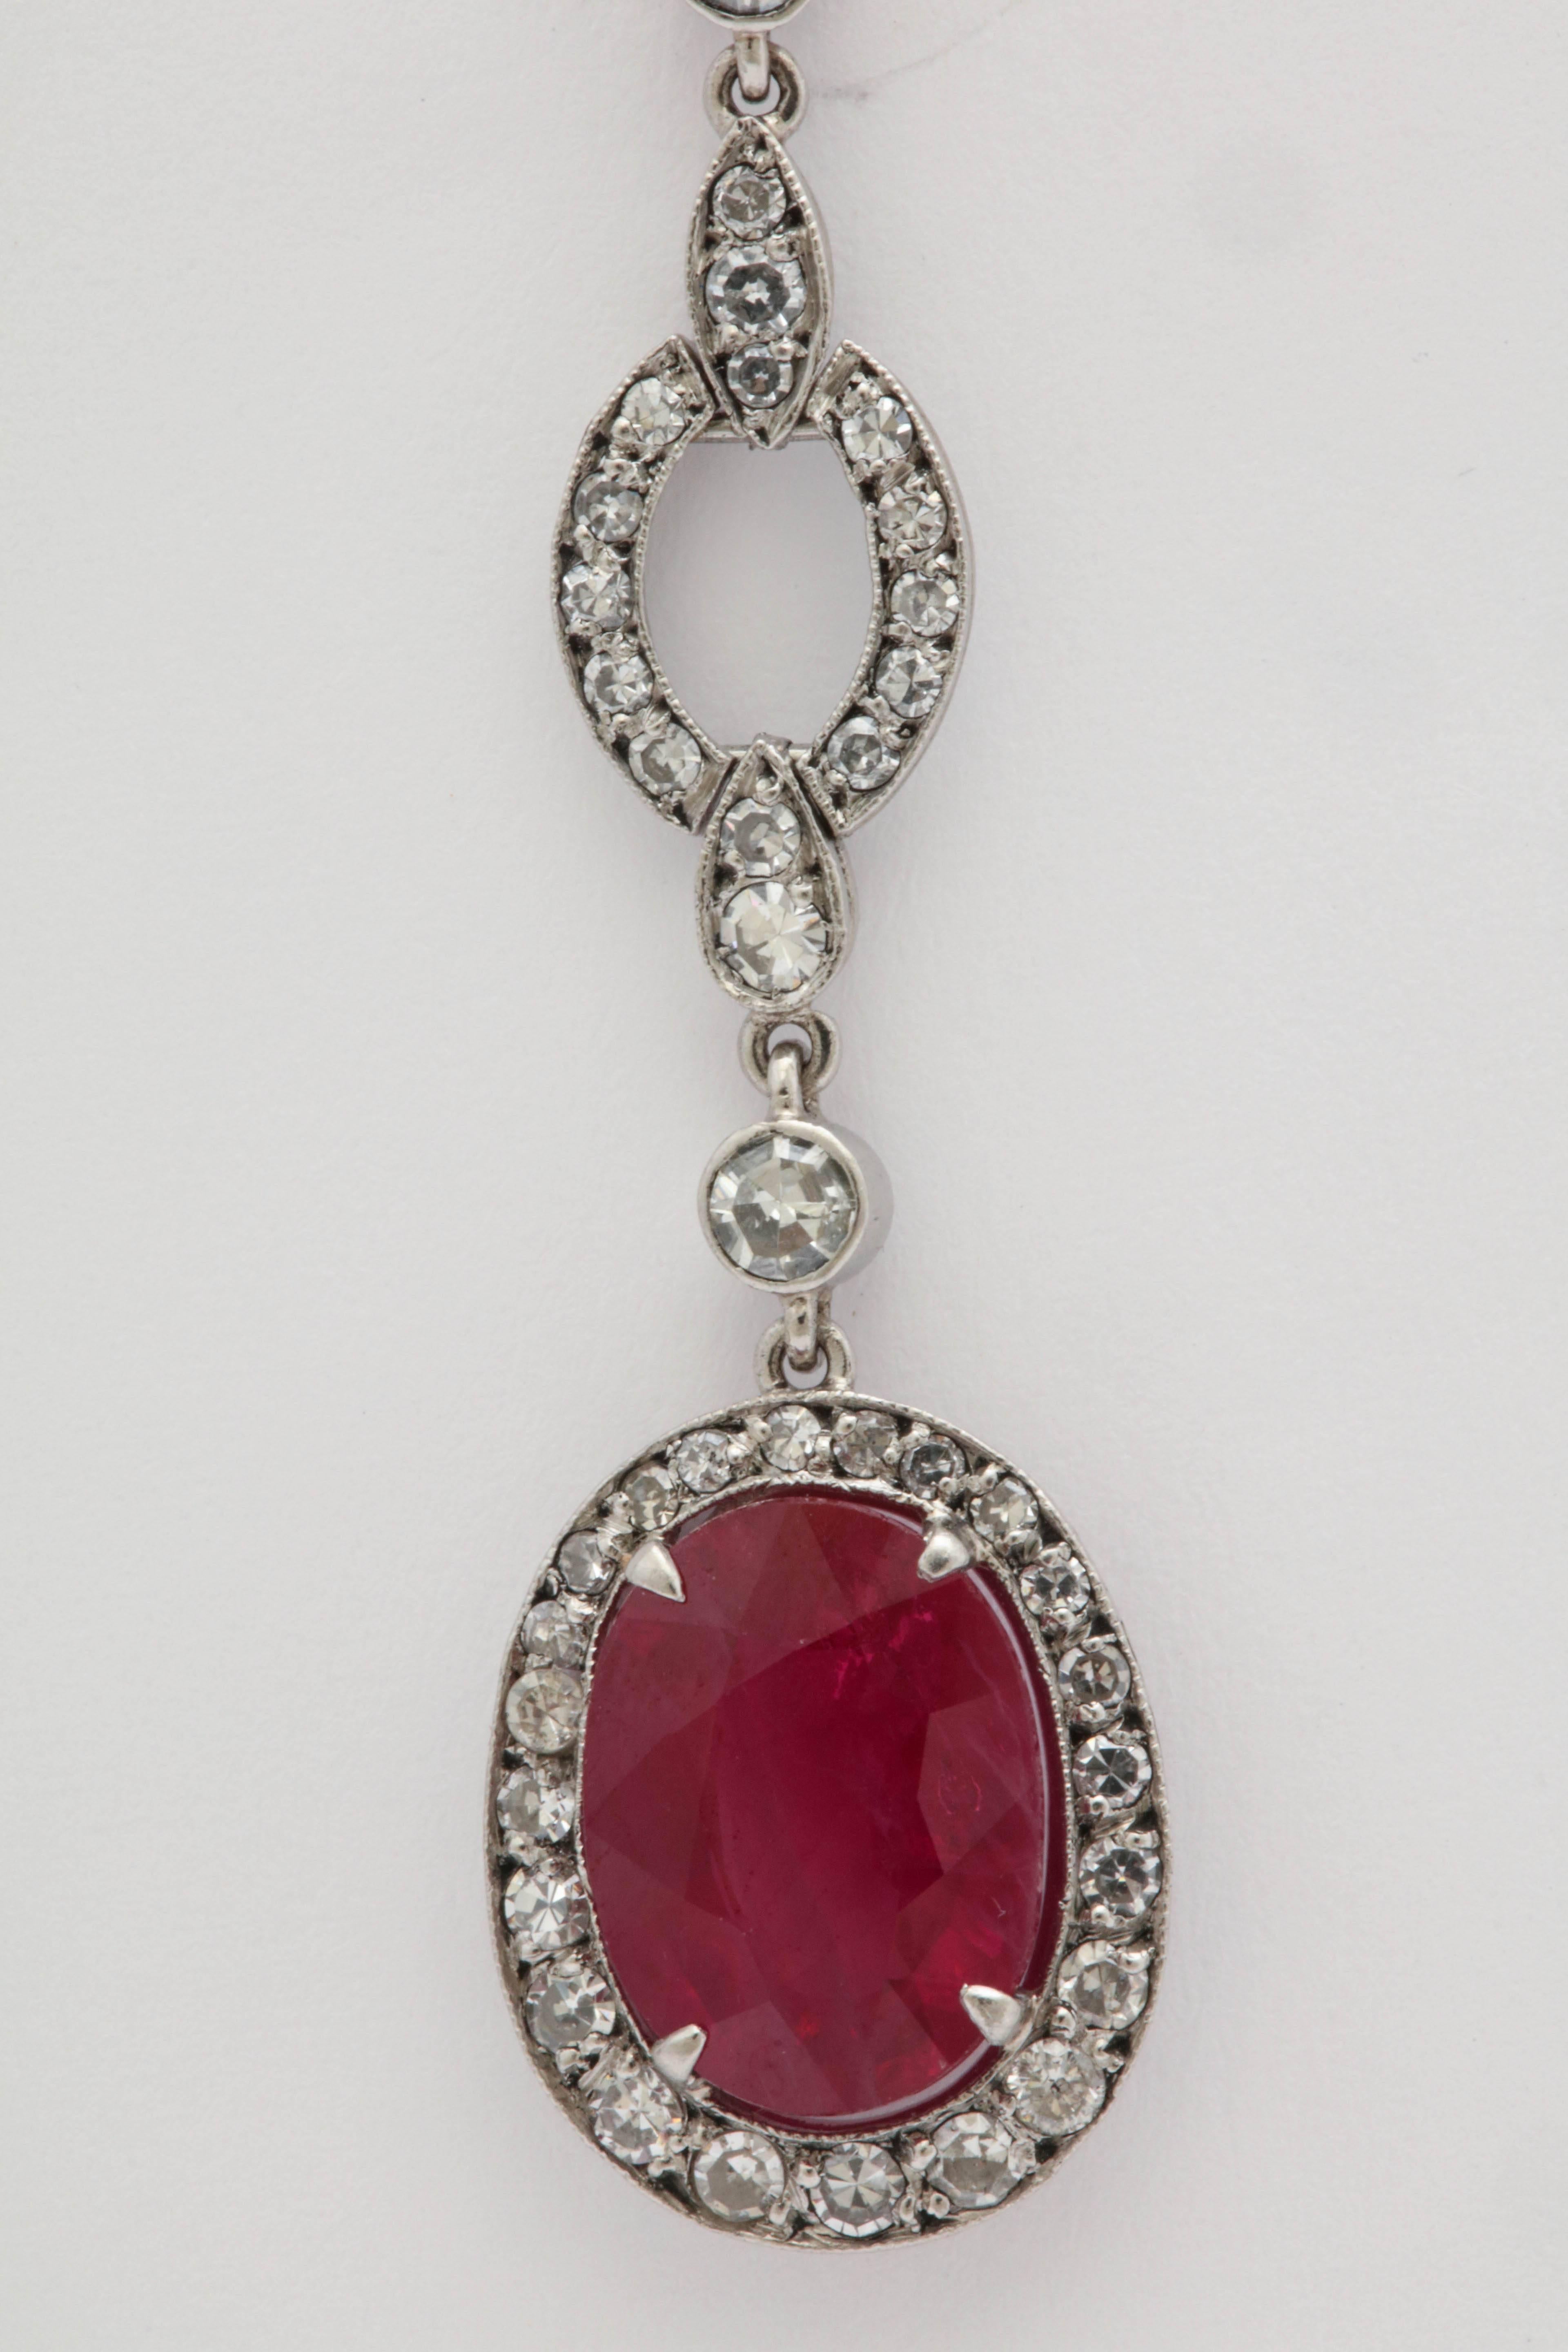 One Pair Of Ladies Platinum And Diamond Drop Pendant Earrings Designed With Two Faceted Scissor Cut Rubies Weighing approximately Two Carats Each, Beautiful Color And Cut.Total Approximate Weight Of diamonds Approximately Two Carats. Beautifully